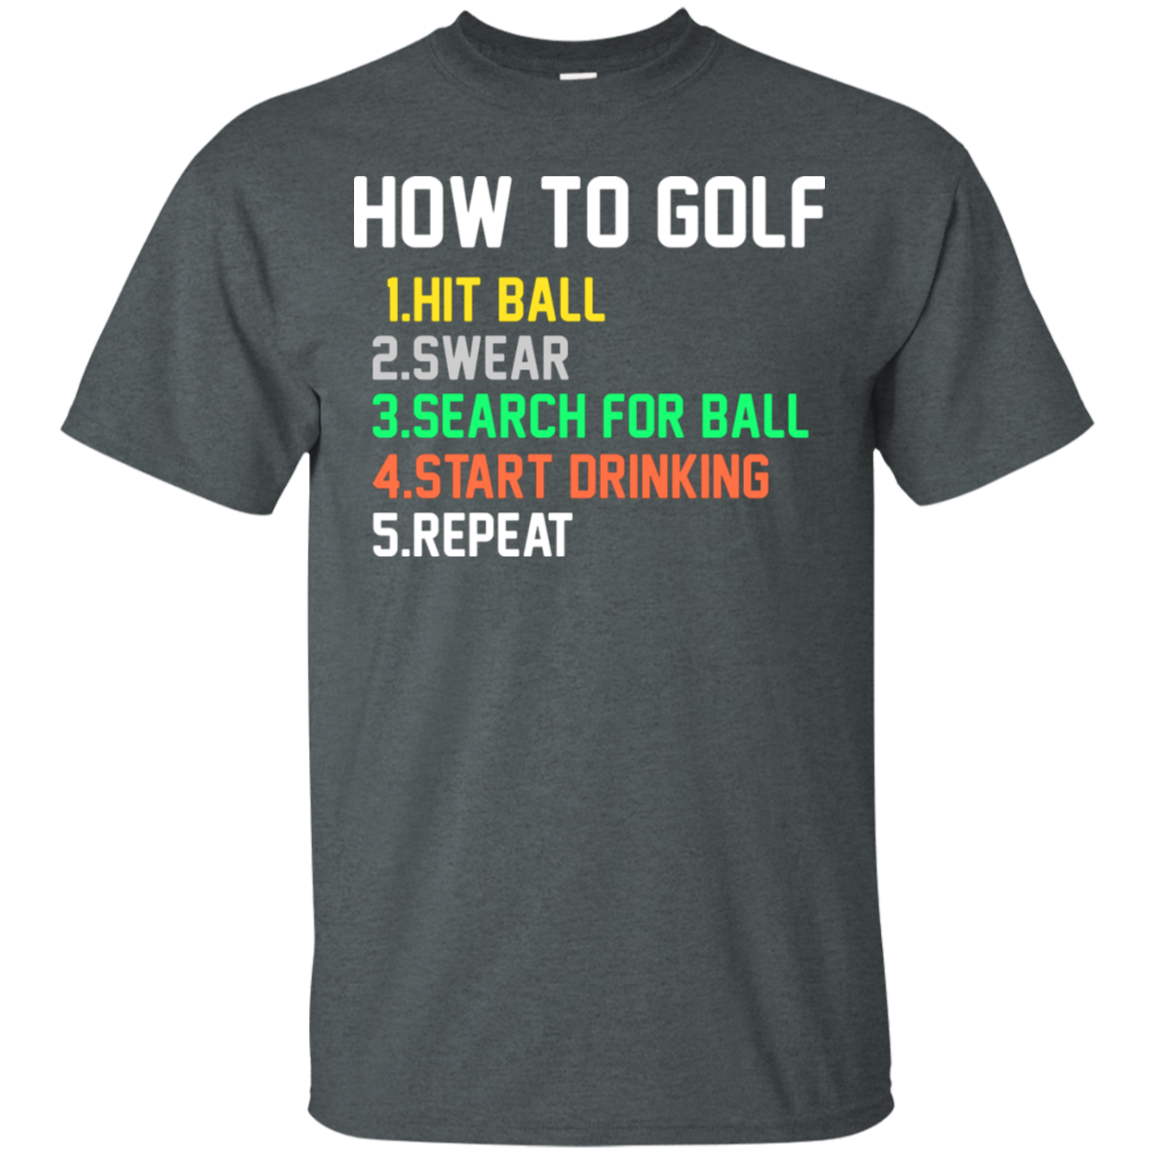 How To Golf T-Shirt Apparel - The Beer Lodge